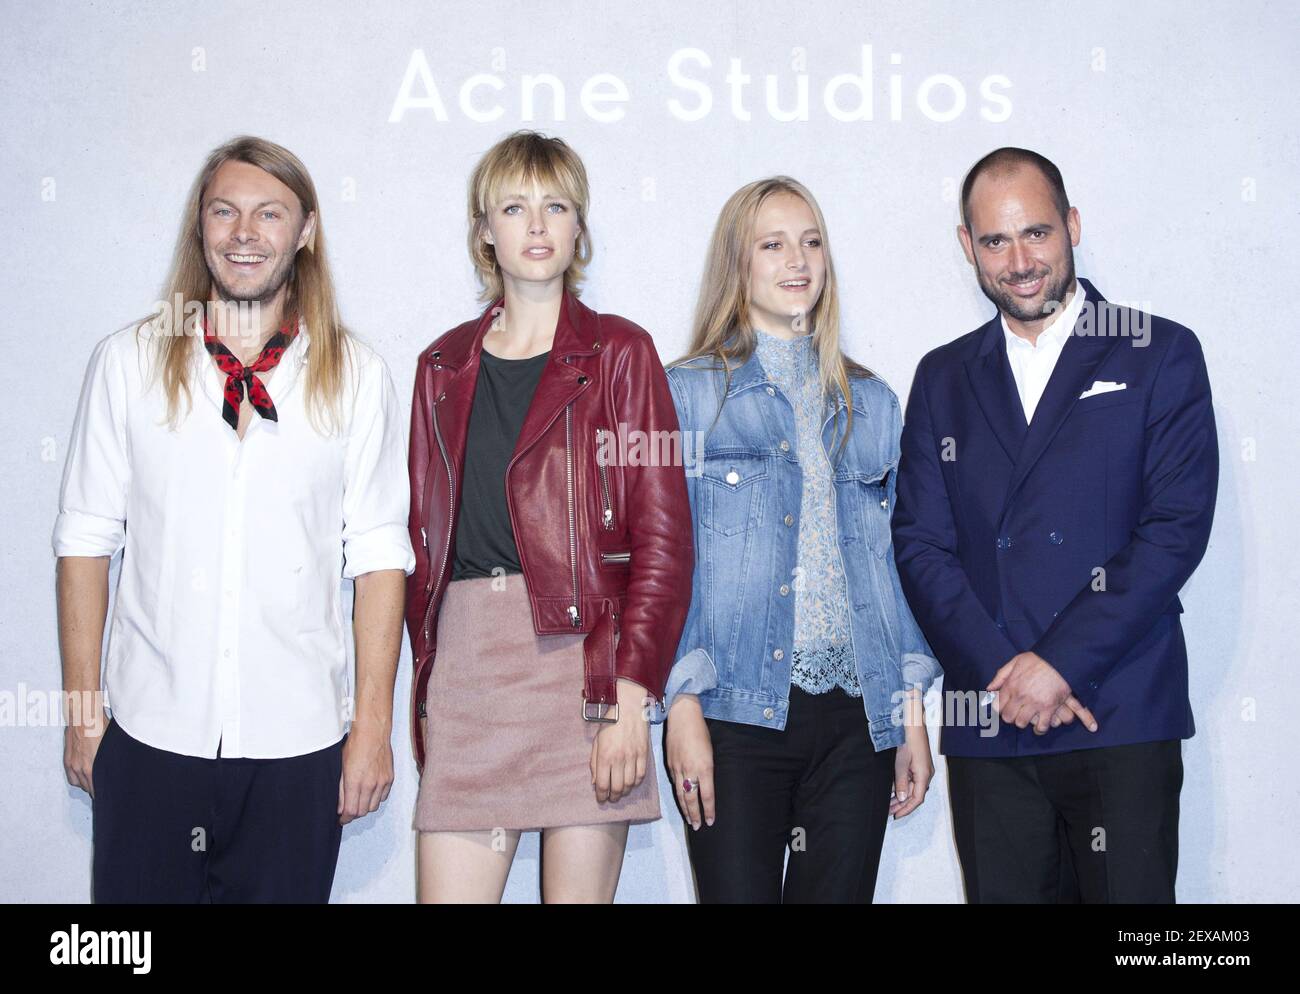 18 September 2015 - Seoul, South Korea : (L to R) Swedish Mattias Magnusson, CEO of Acne Studio, Super model Edie Cambell, Olivia Cambell and Mikael Schiller, Chairman of Acne Studio Corp,. arrived photo call for the Swedish multidisciplinary luxury fashion house 'Acne Studio' flagship store opening ceremony at Cheongdam flagship store in Seoul, South Korea on September 18, 2015. Photo Credit: Lee Young-ho *** Please Use Credit from Credit Field *** Stock Photo